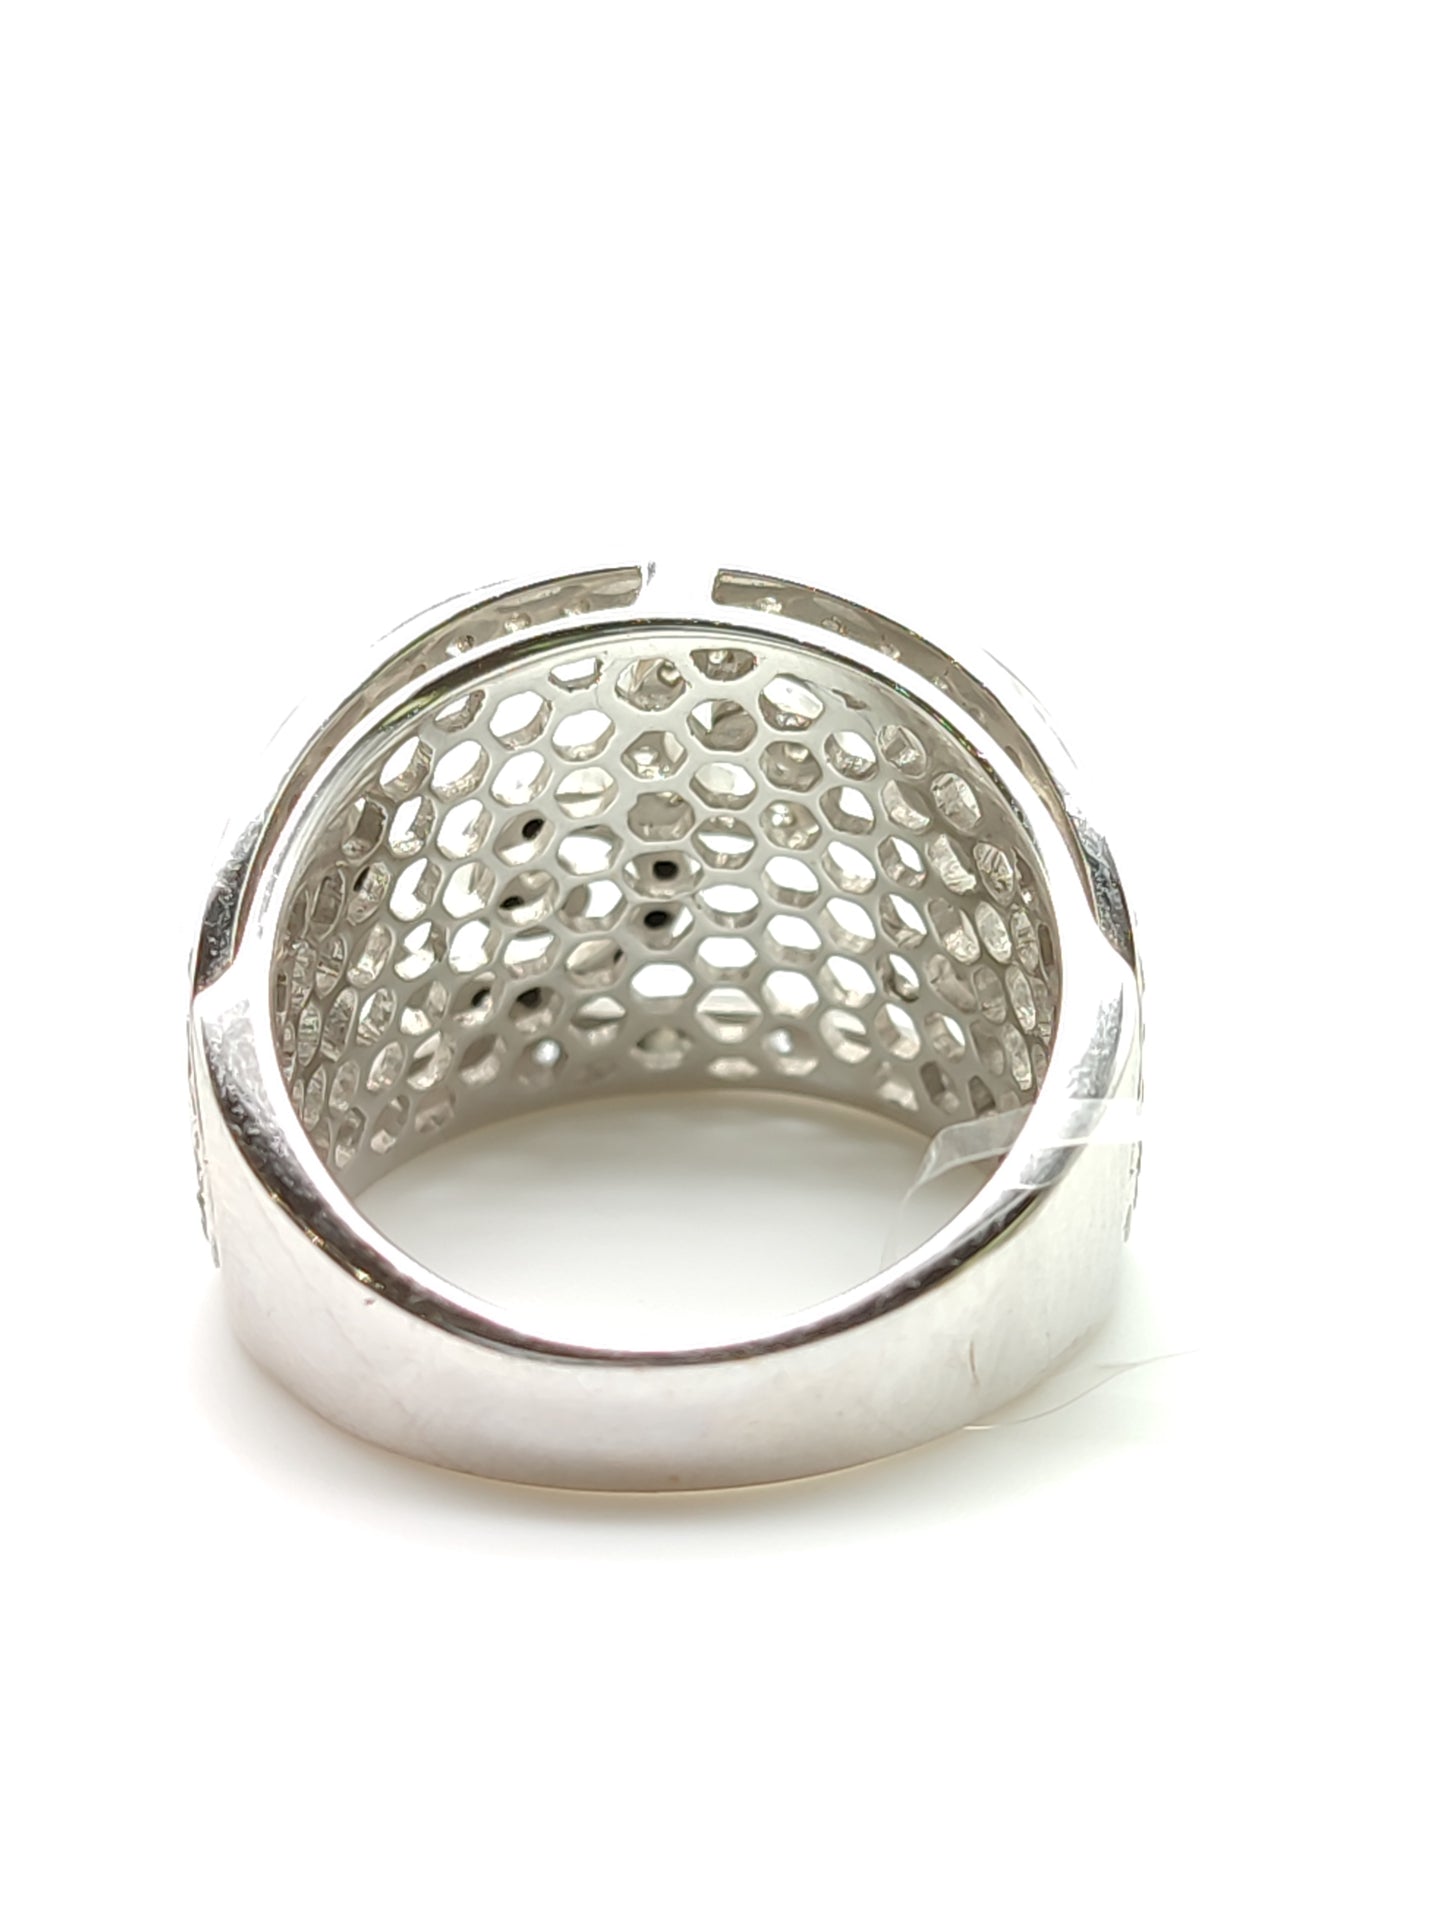 Pavan - White gold ring with diamonds